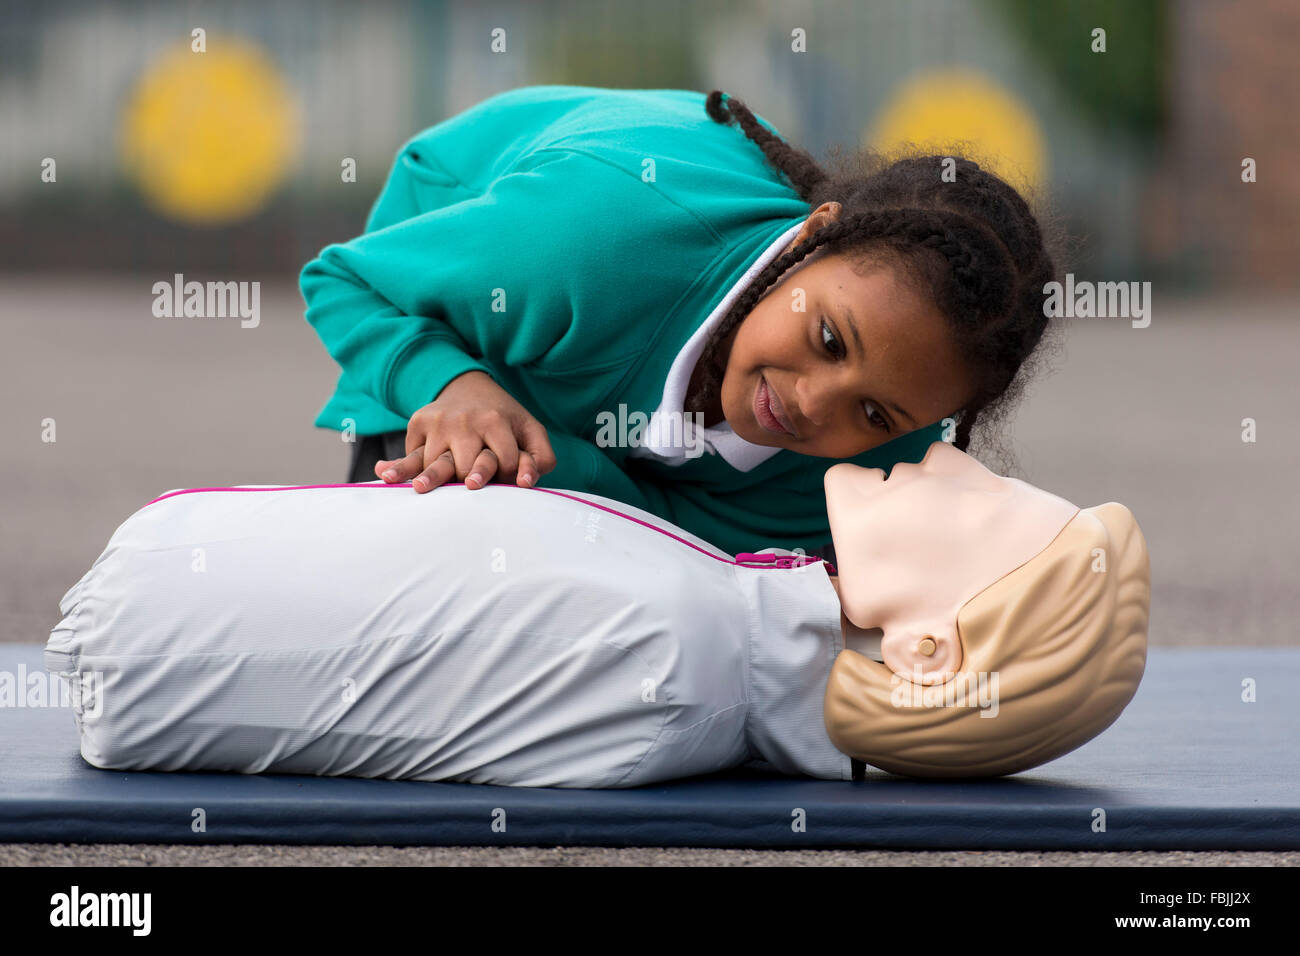 A schoolgirl learns life saving first aid techniques by practicing on a dummy at school. Stock Photo